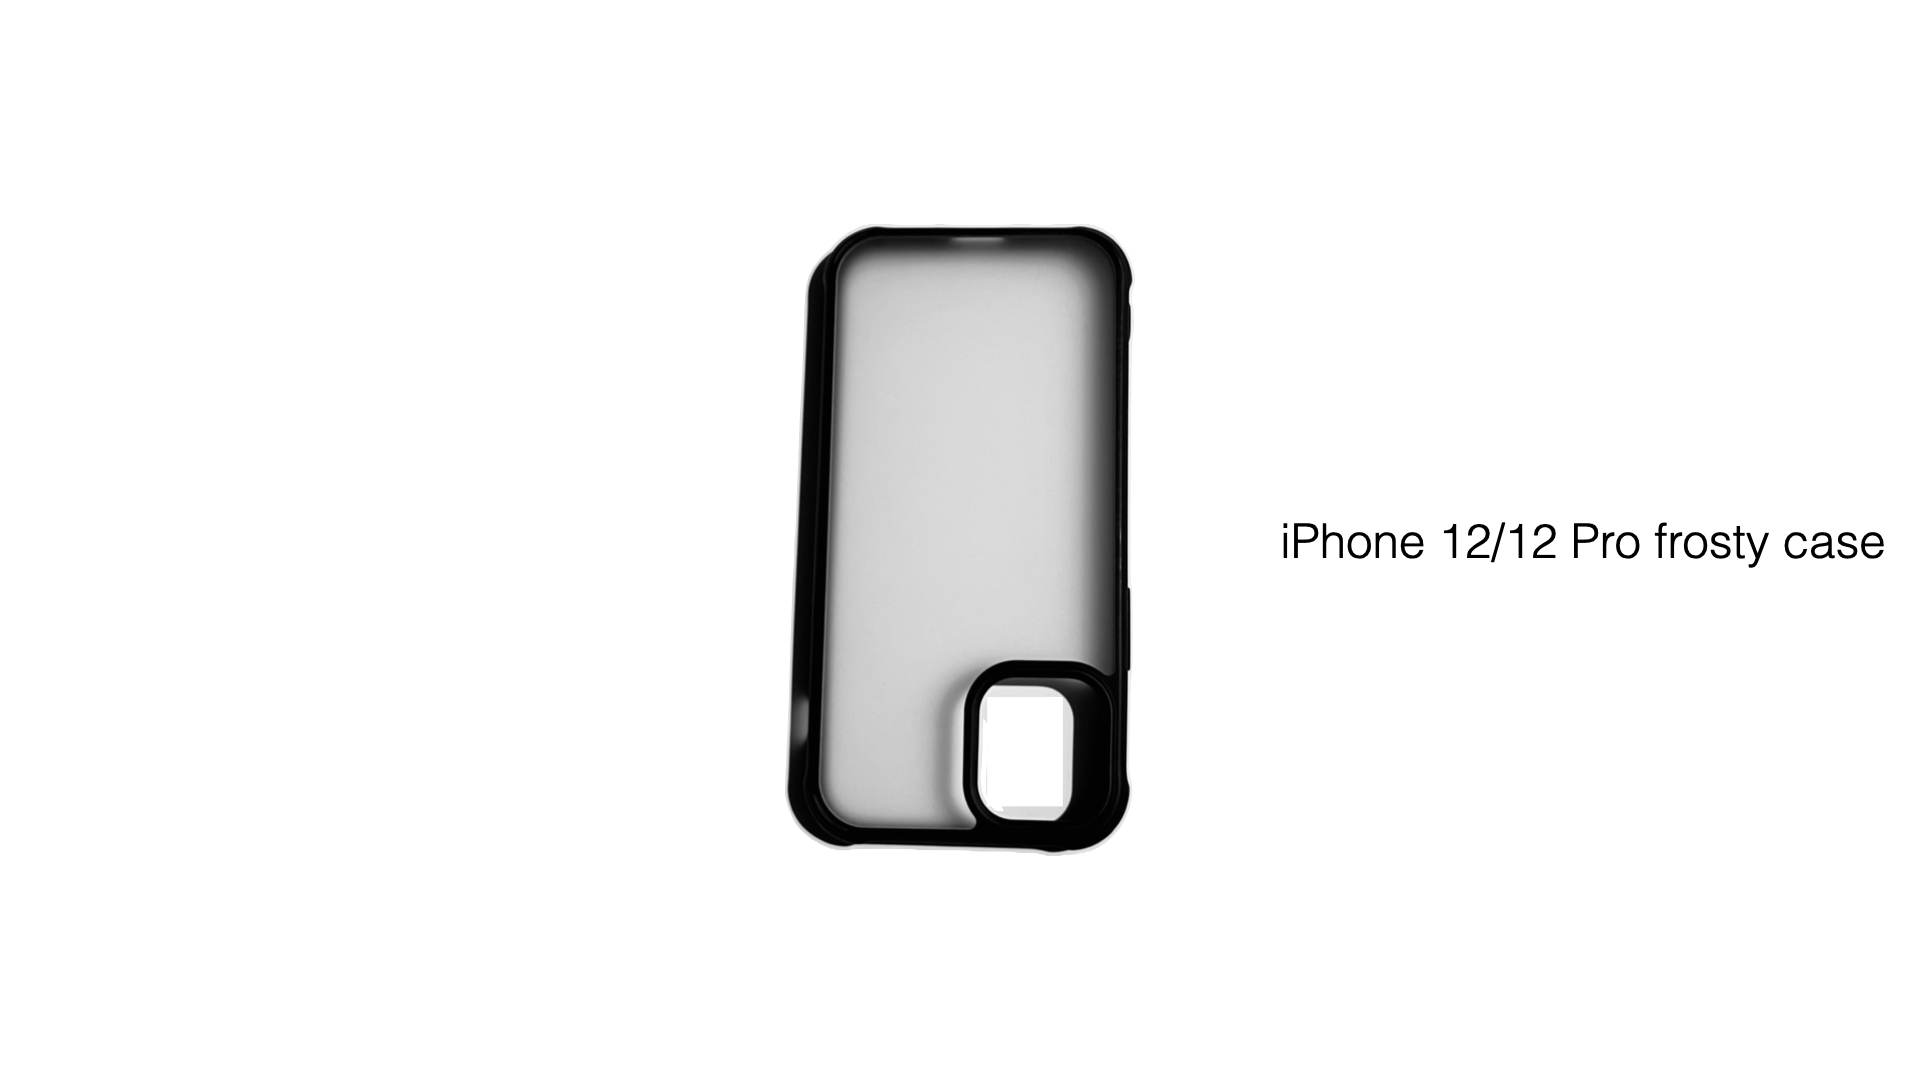 iPhone 12/12 Pro Frosty Clear Case, Durable Back Panel with TPU bumper